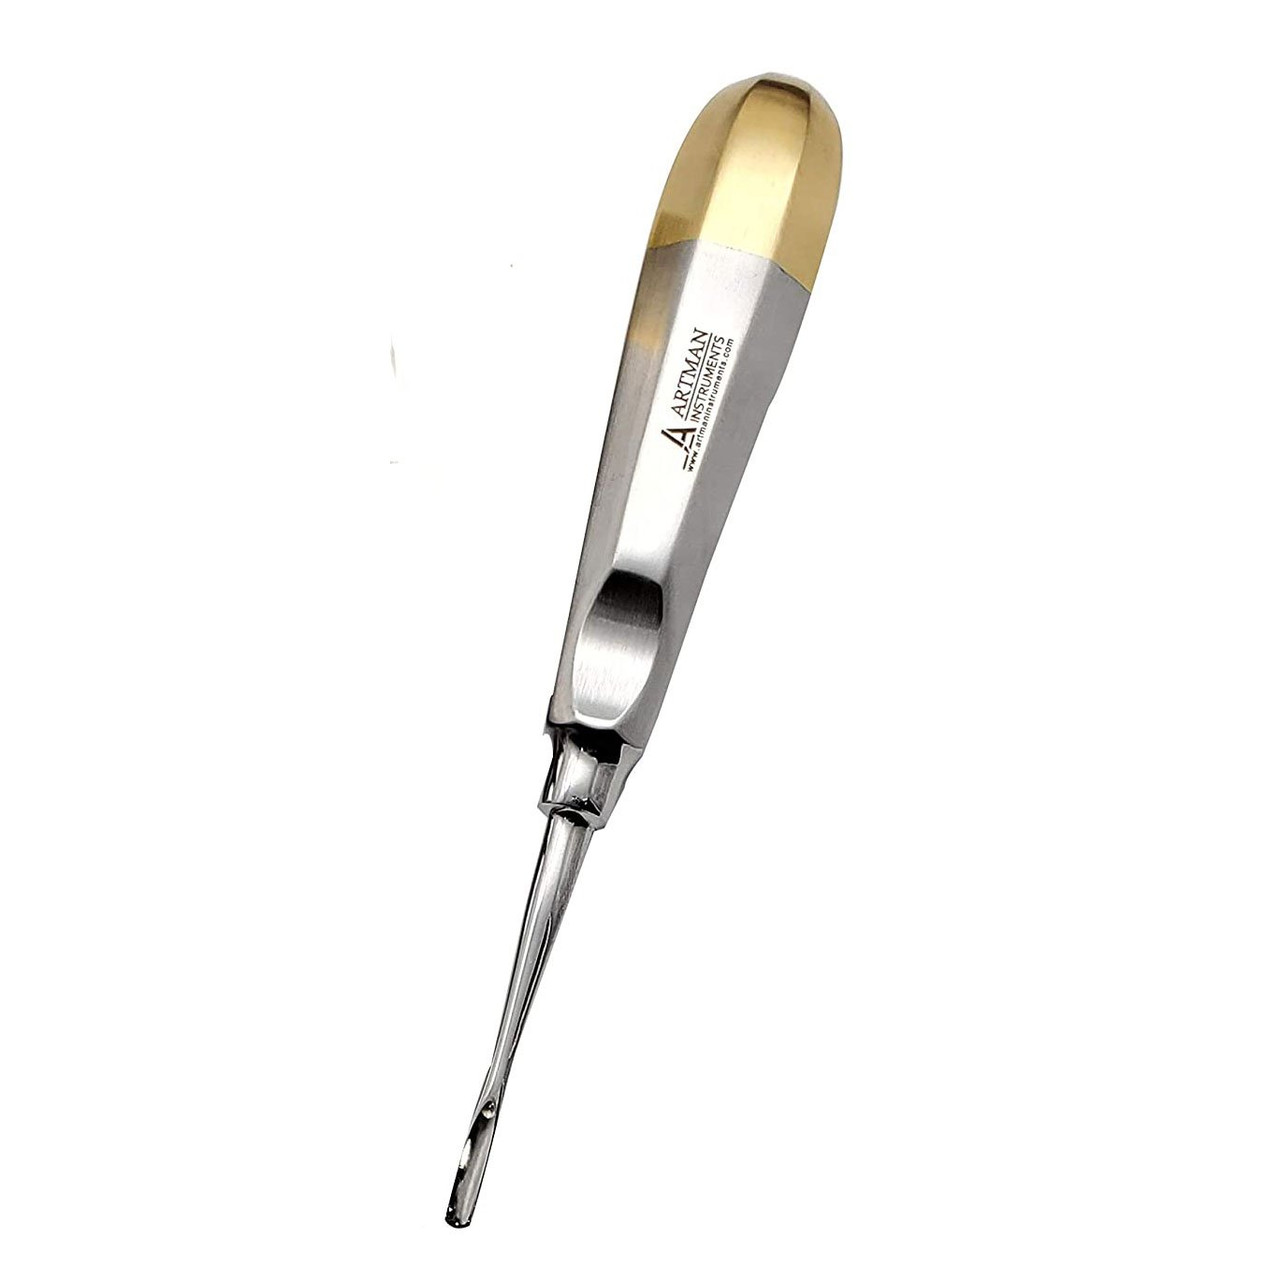 Dental Straight Extraction Elevators Luxating Root Tip Elevator Gouge Elevator with apical width as 4mm Medium